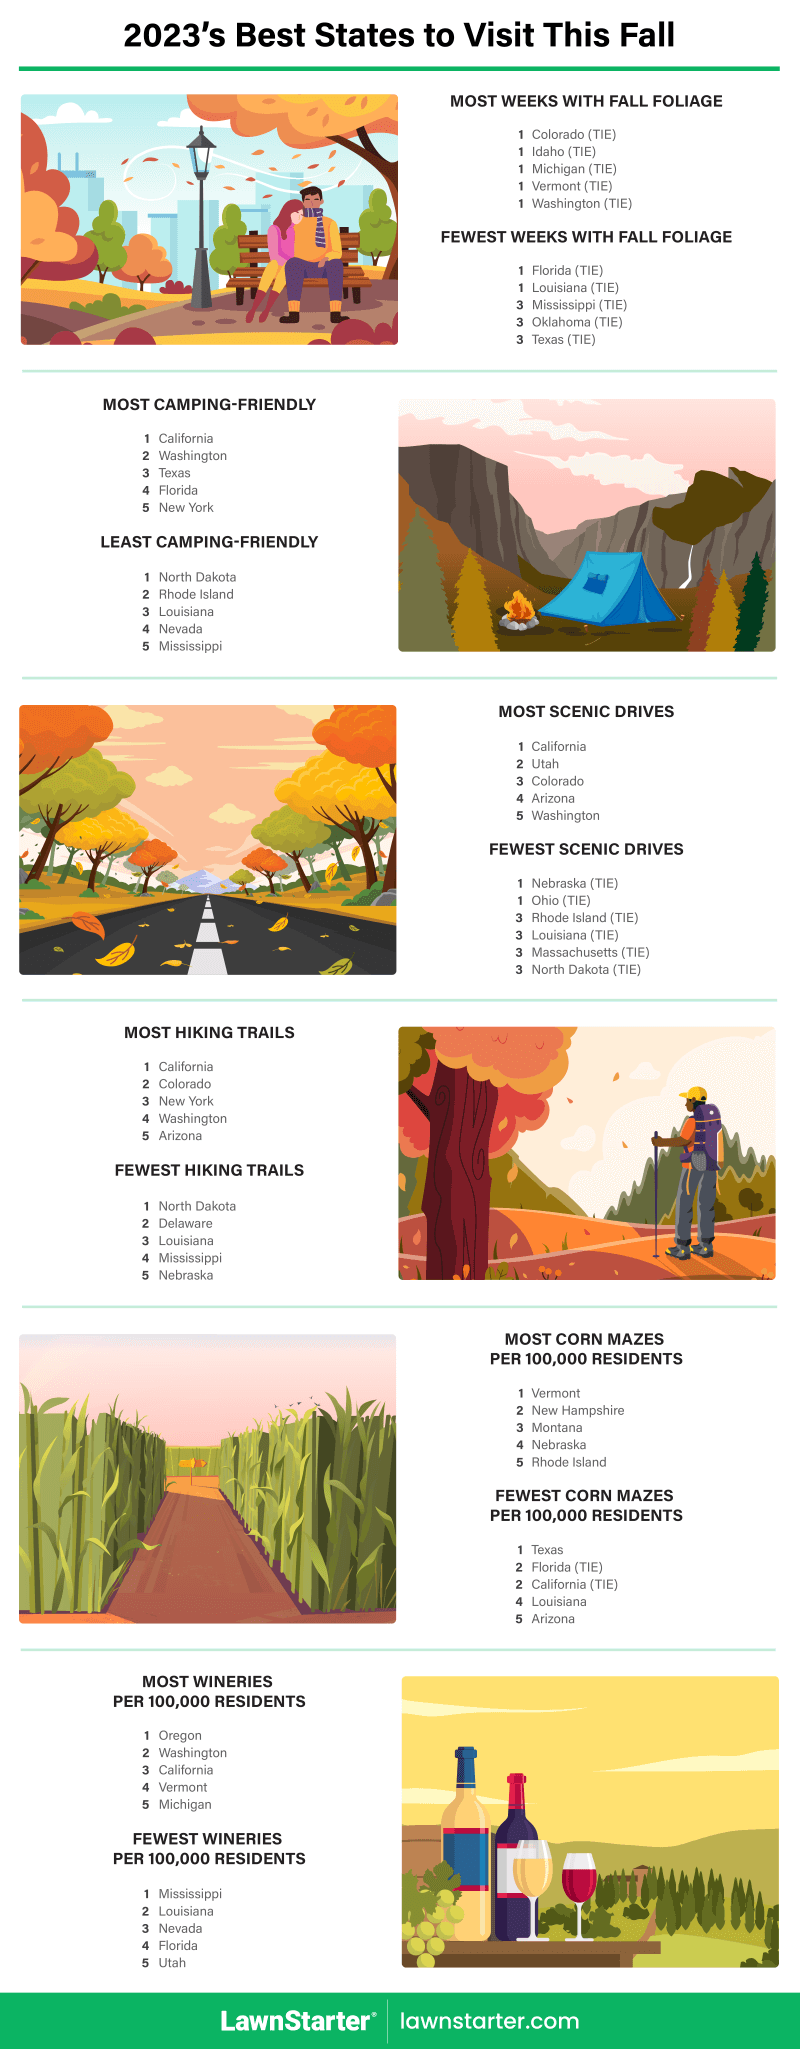 Infographic showing the Best States to Visit This Fall, a ranking based on fall foliage, scenic drives, fall festivals, and more